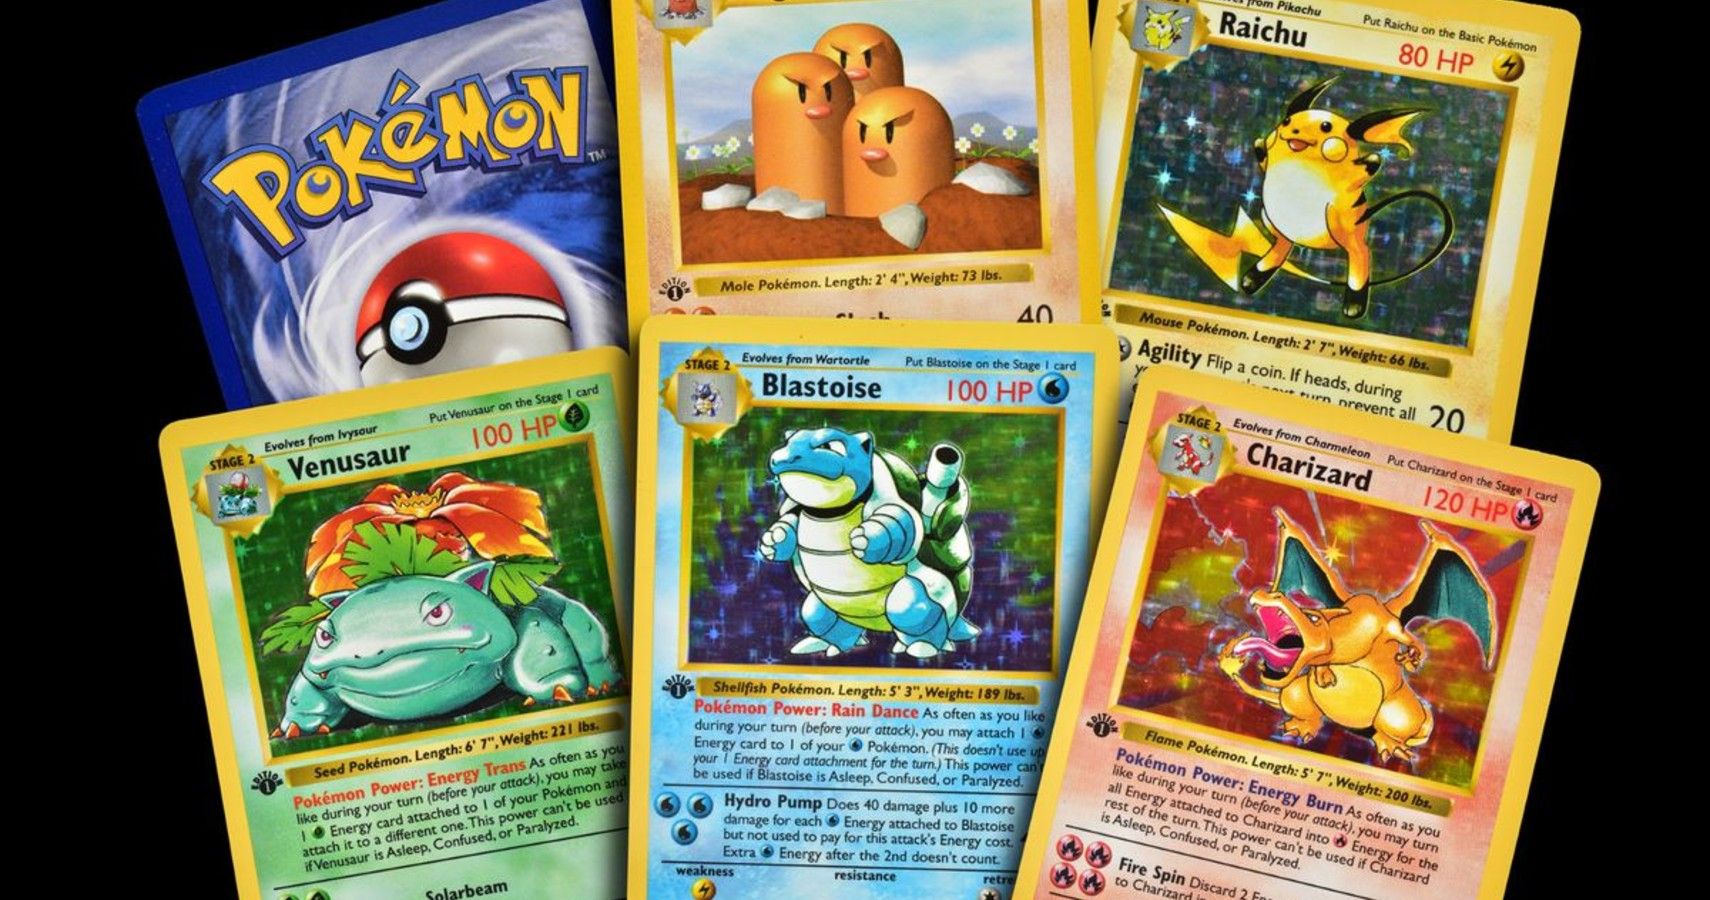 1st Edition Set Of Pokemon Cards Including A Charizard Sells For $666000 -  